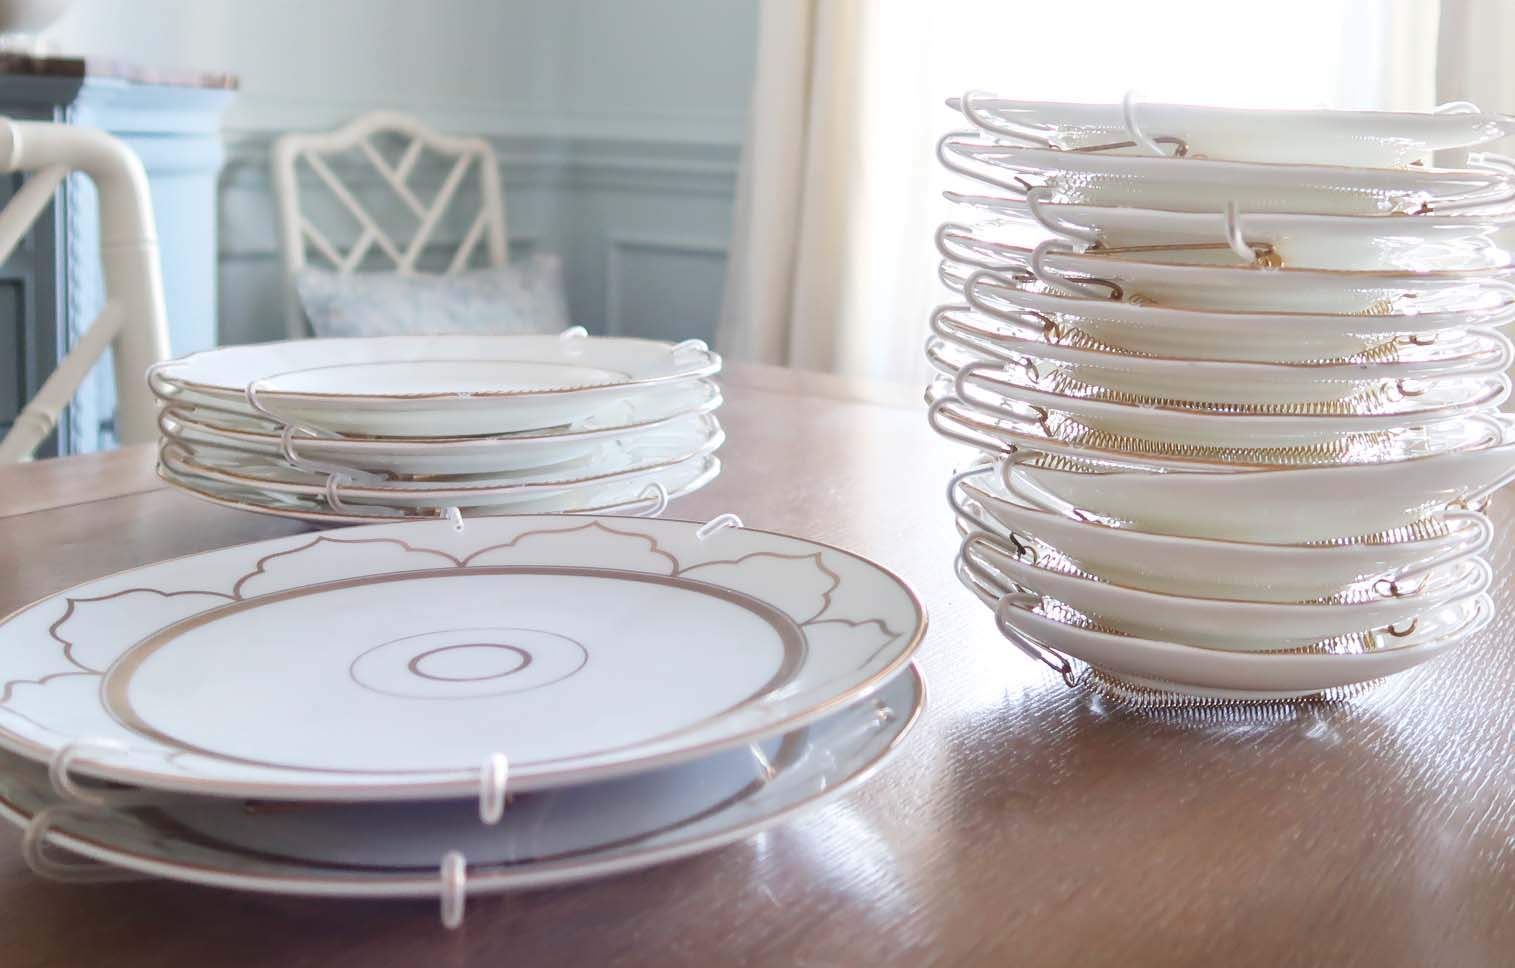 Plates with Hangers Stacked